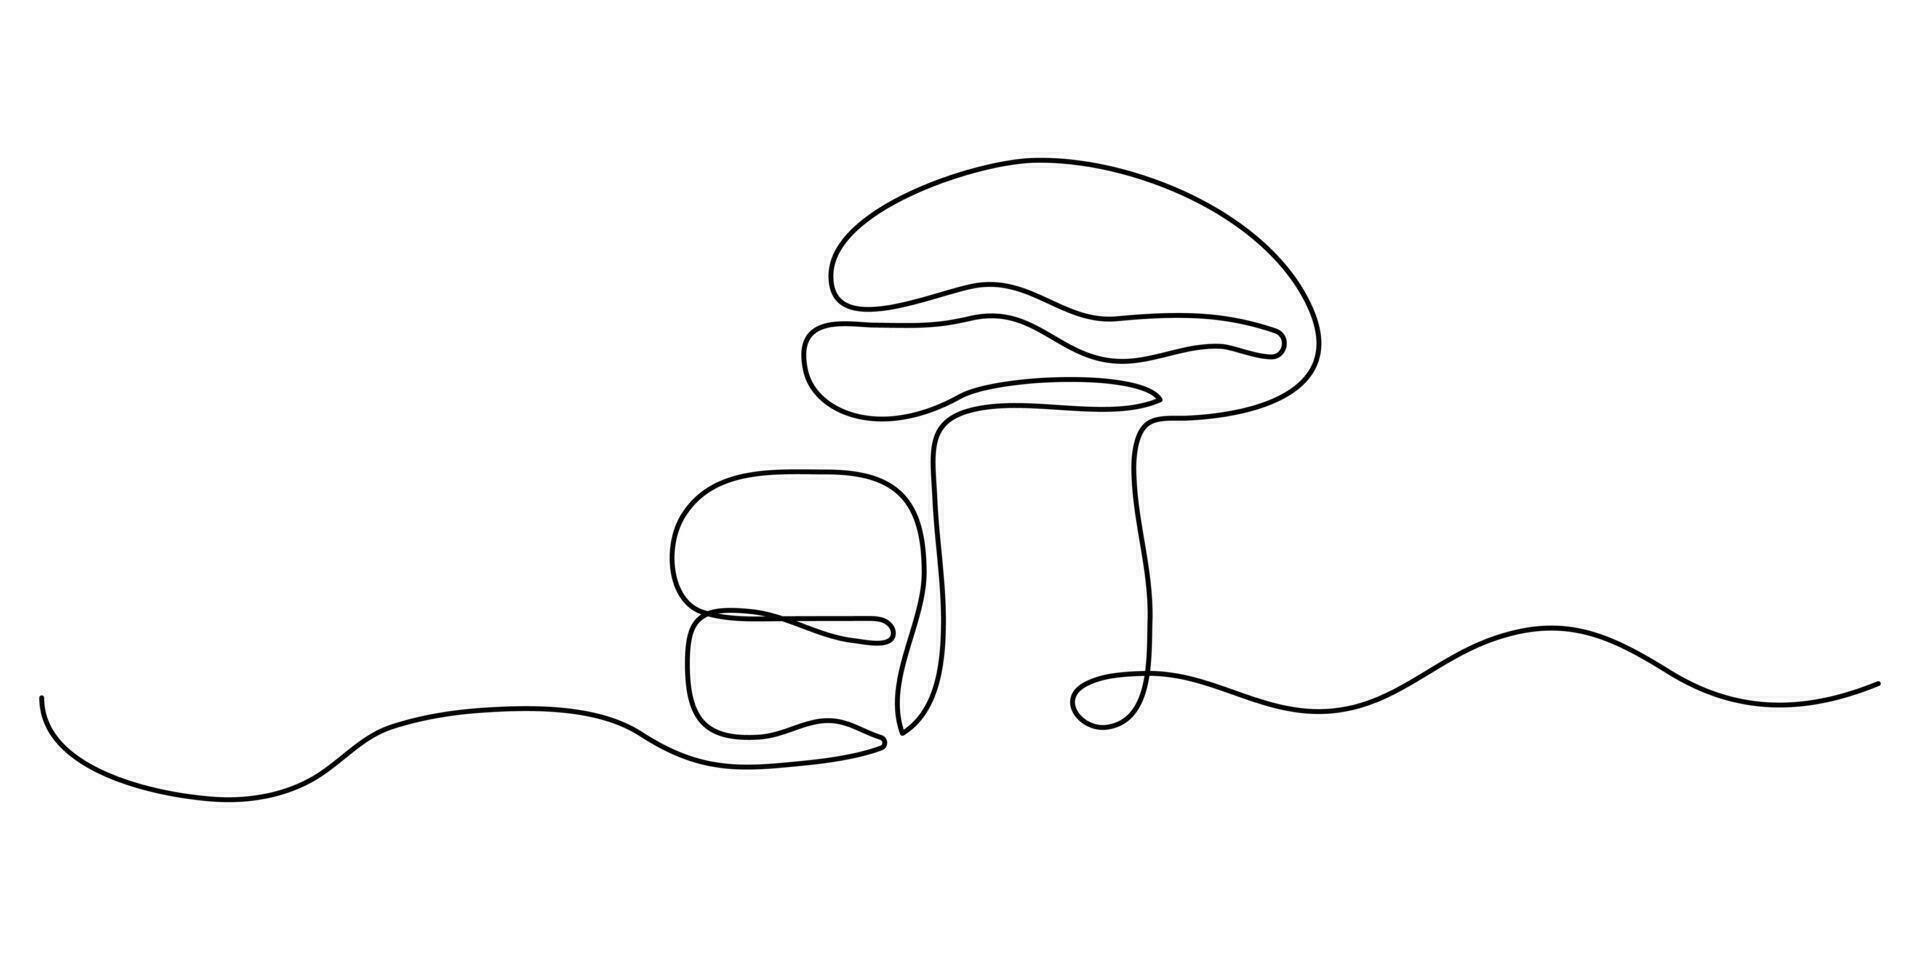 Mushrooms line art. One continuous line drawing abstract leaf isolated vector object on white background